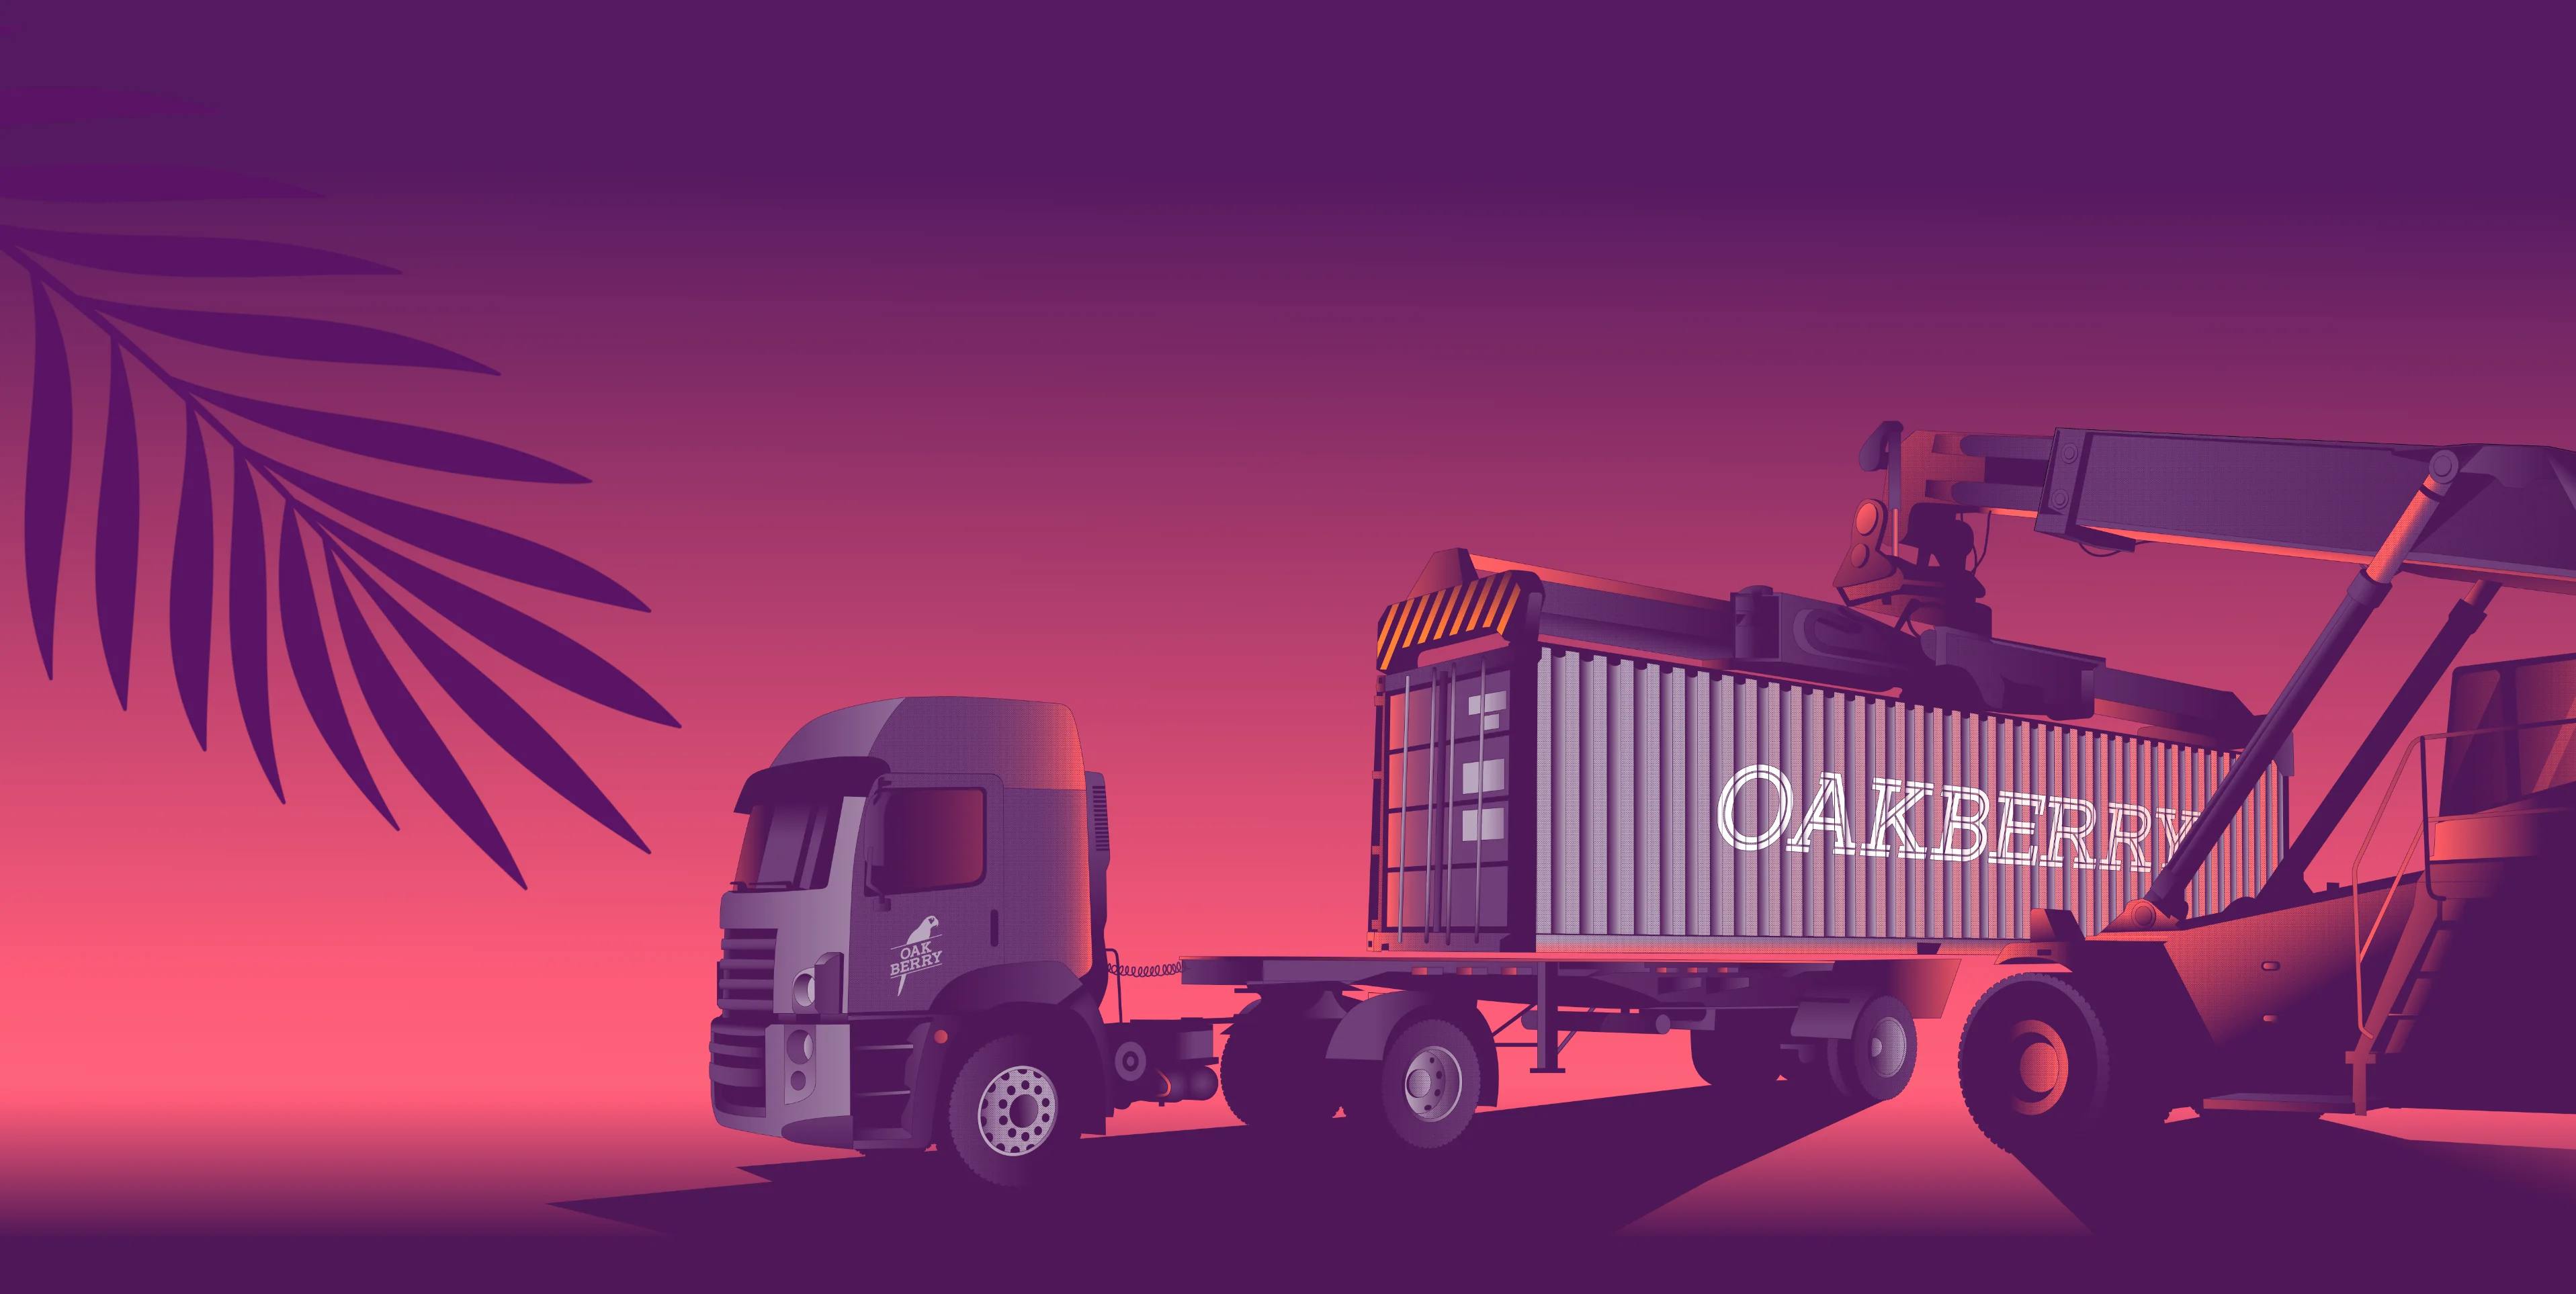 A truck being loaded with an OAKBERRY açaí trailer